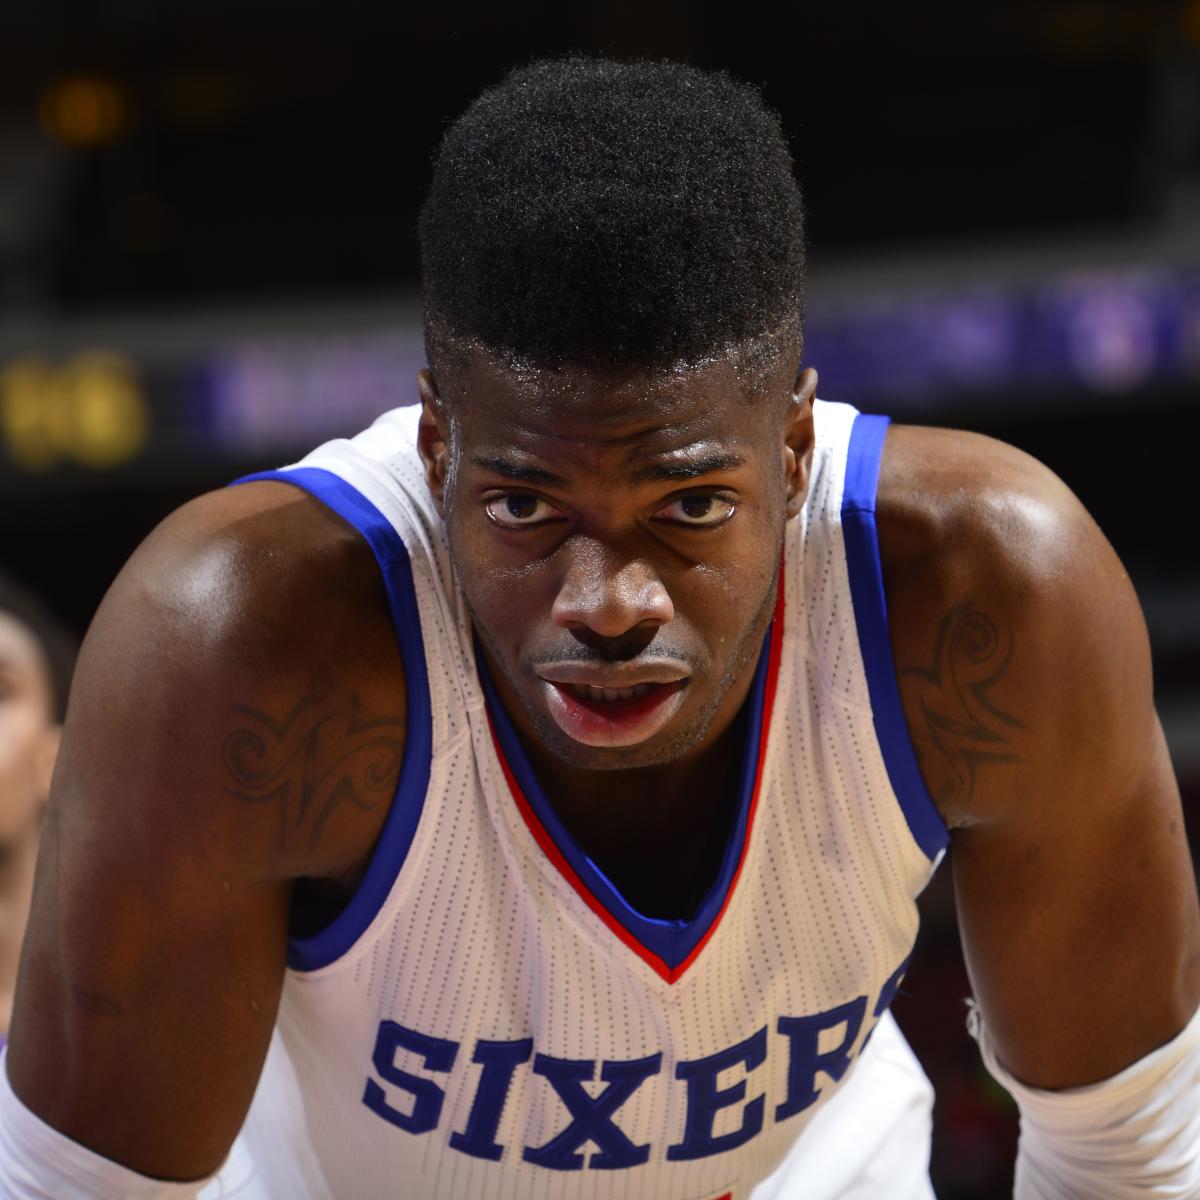 Nerlens Noel is one of the top centers in this year's FA market. Will we  see him in a Raptors jersey next season? 👀 #NBA #Raptors…